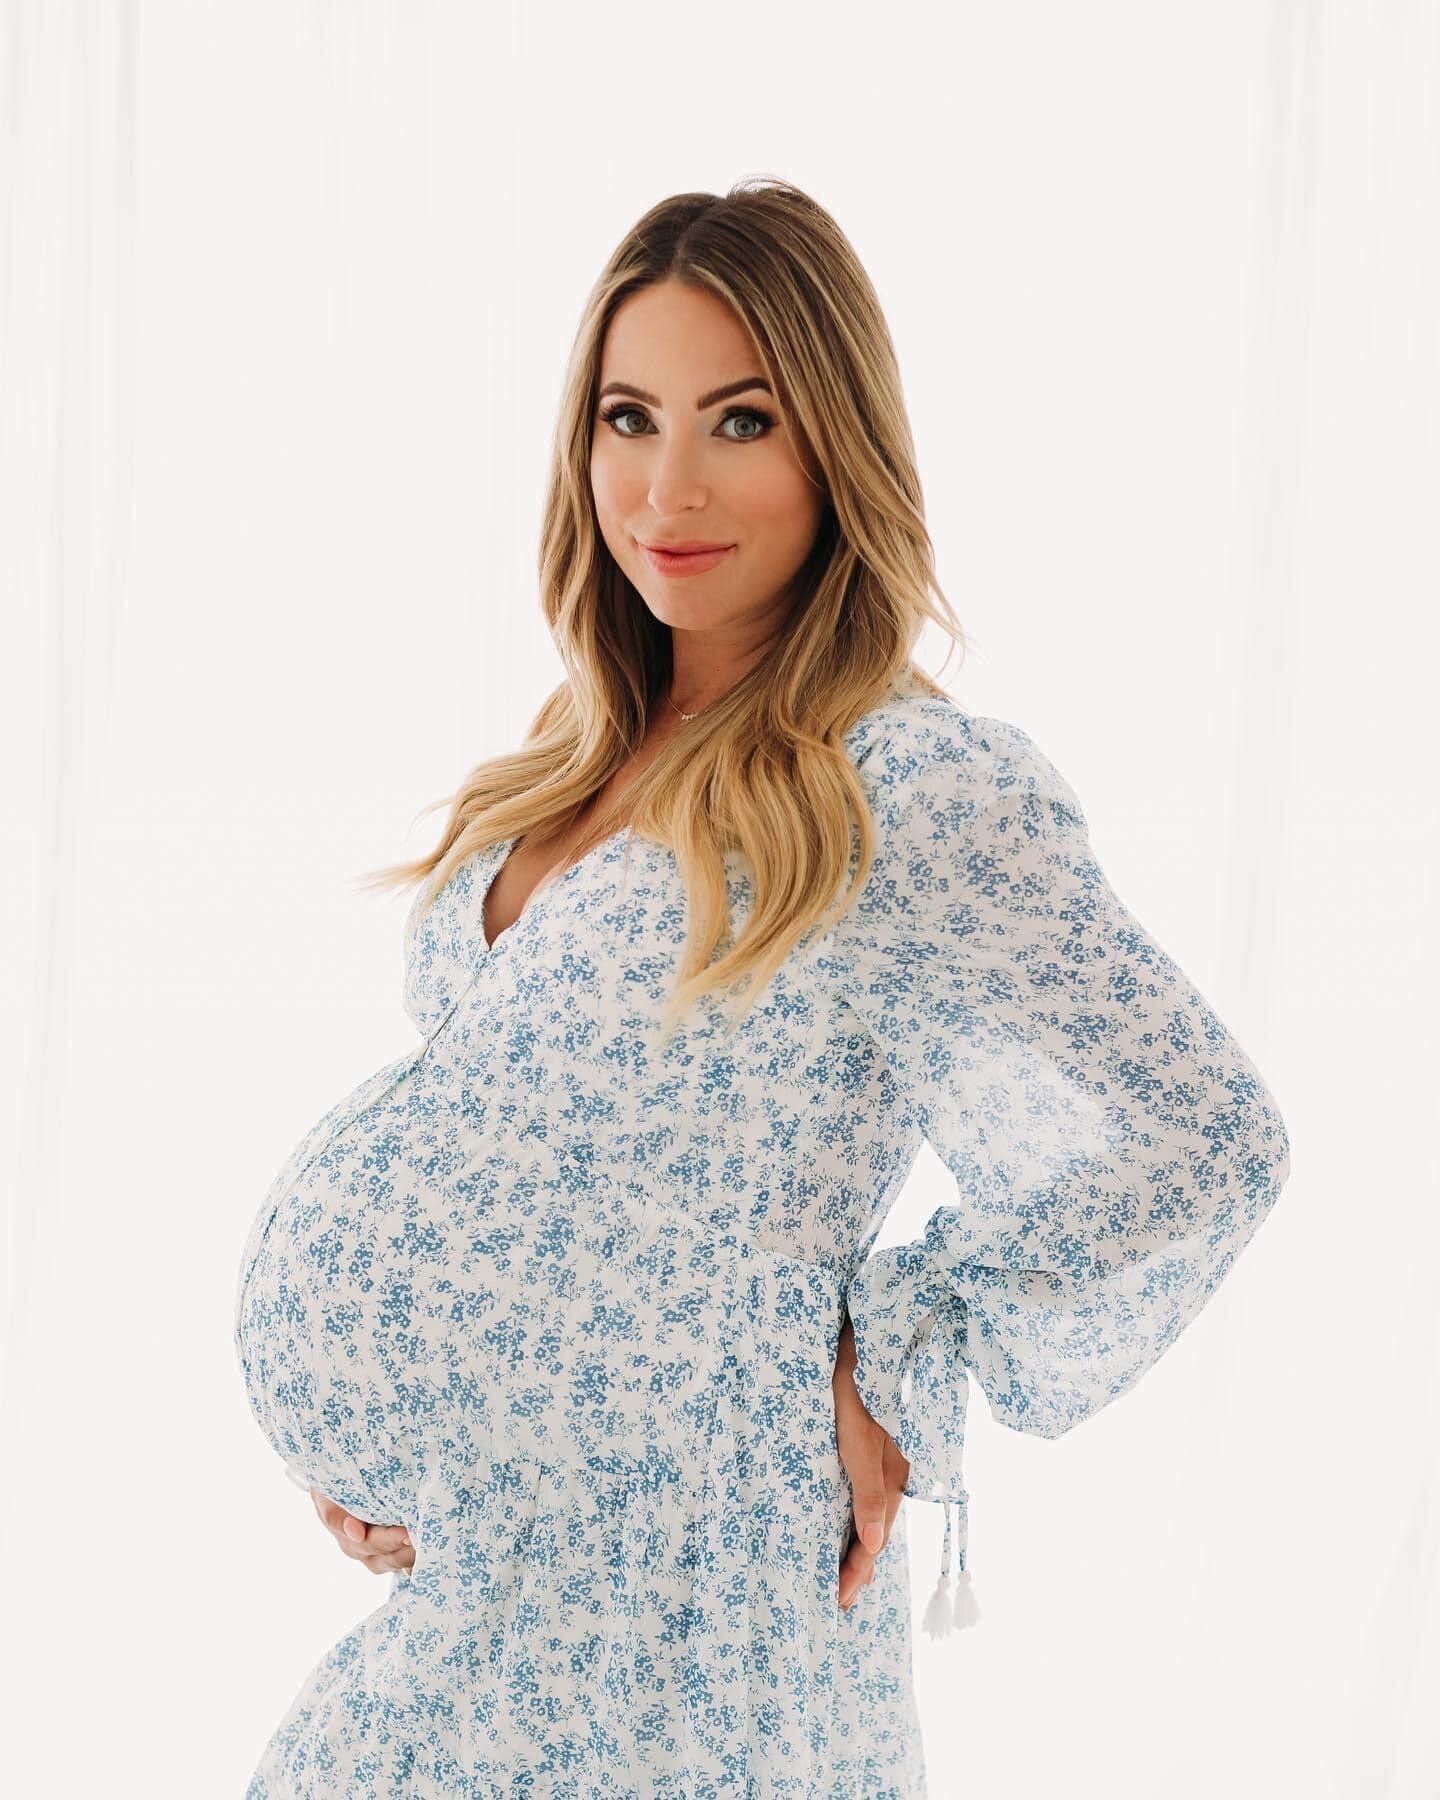 A pregnant woman in a blue and white dress